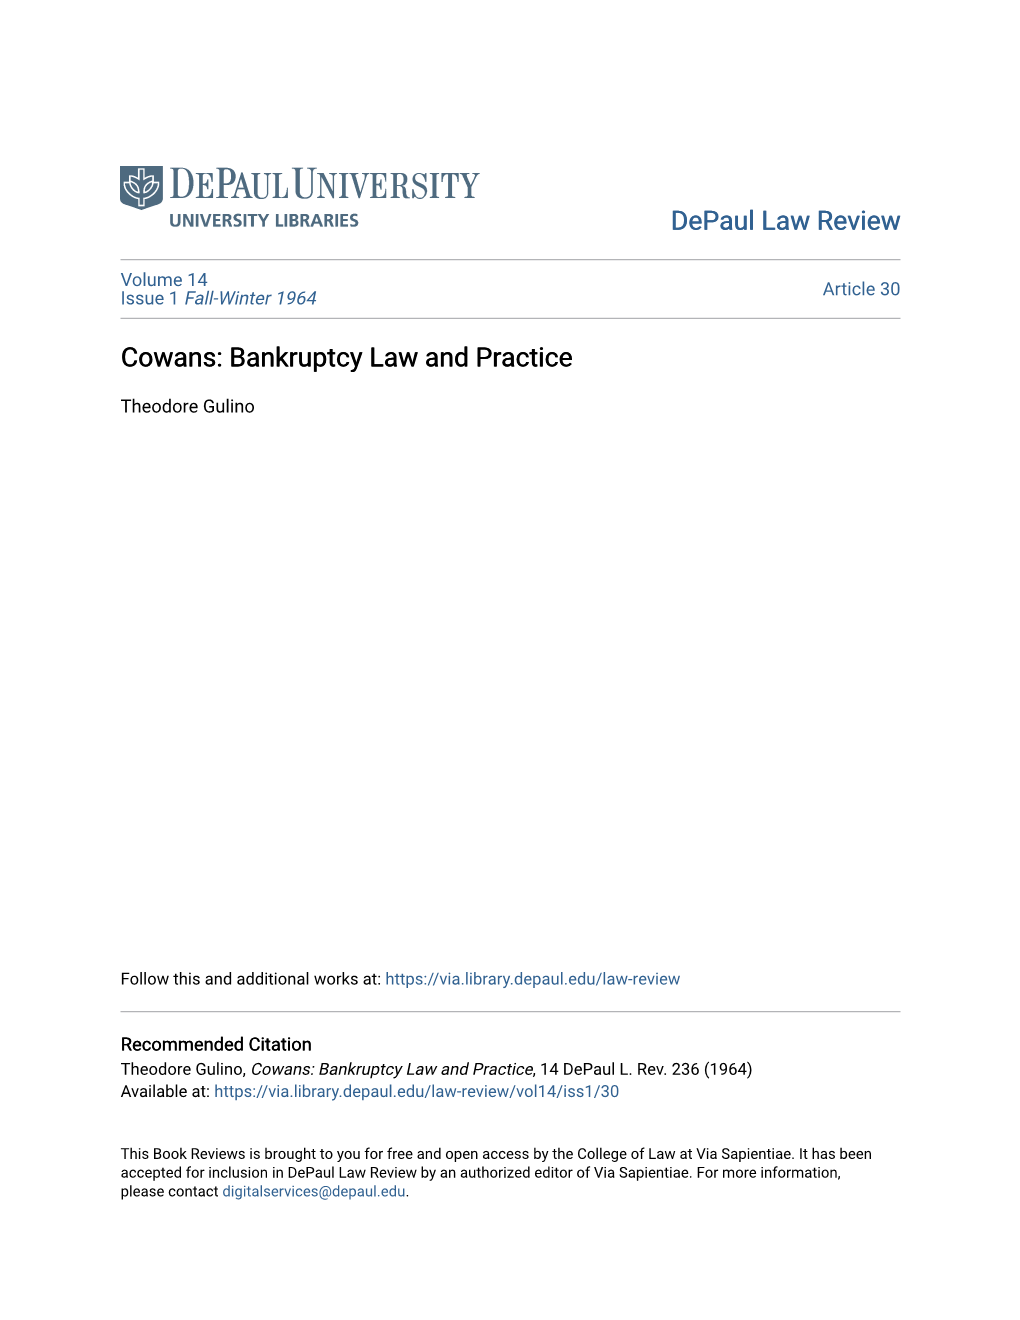 Cowans: Bankruptcy Law and Practice